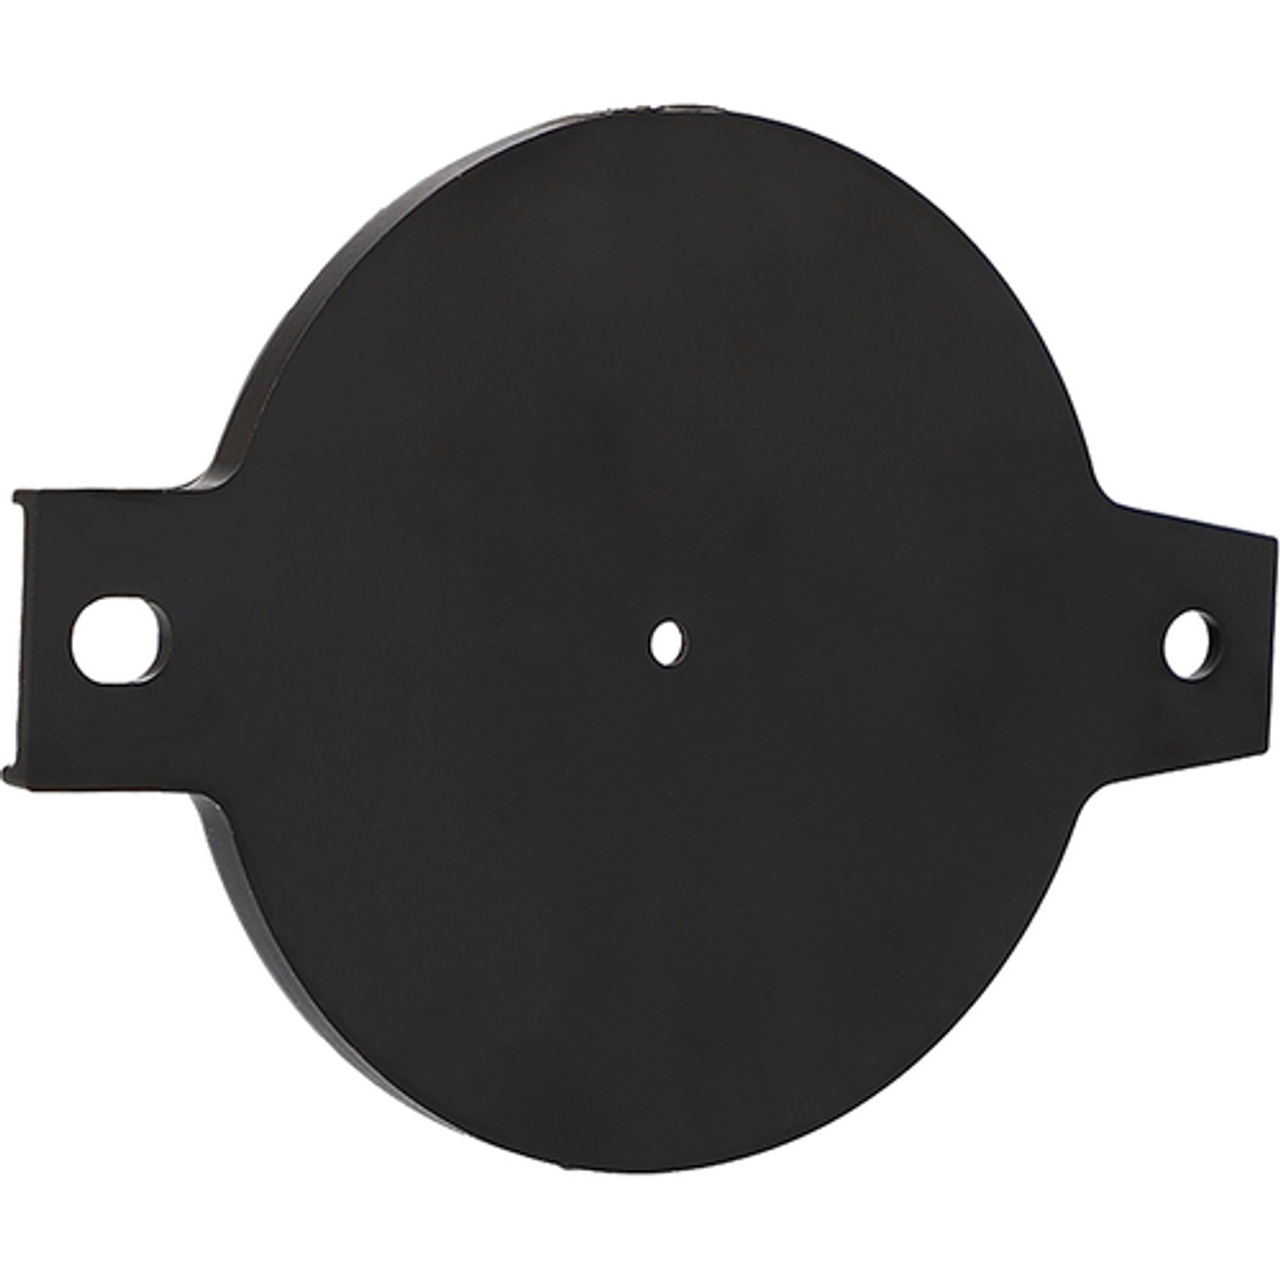 Metra - Speaker Adapter Plates for Most 2013-Up GM Vehicles (2-Pack) - Black